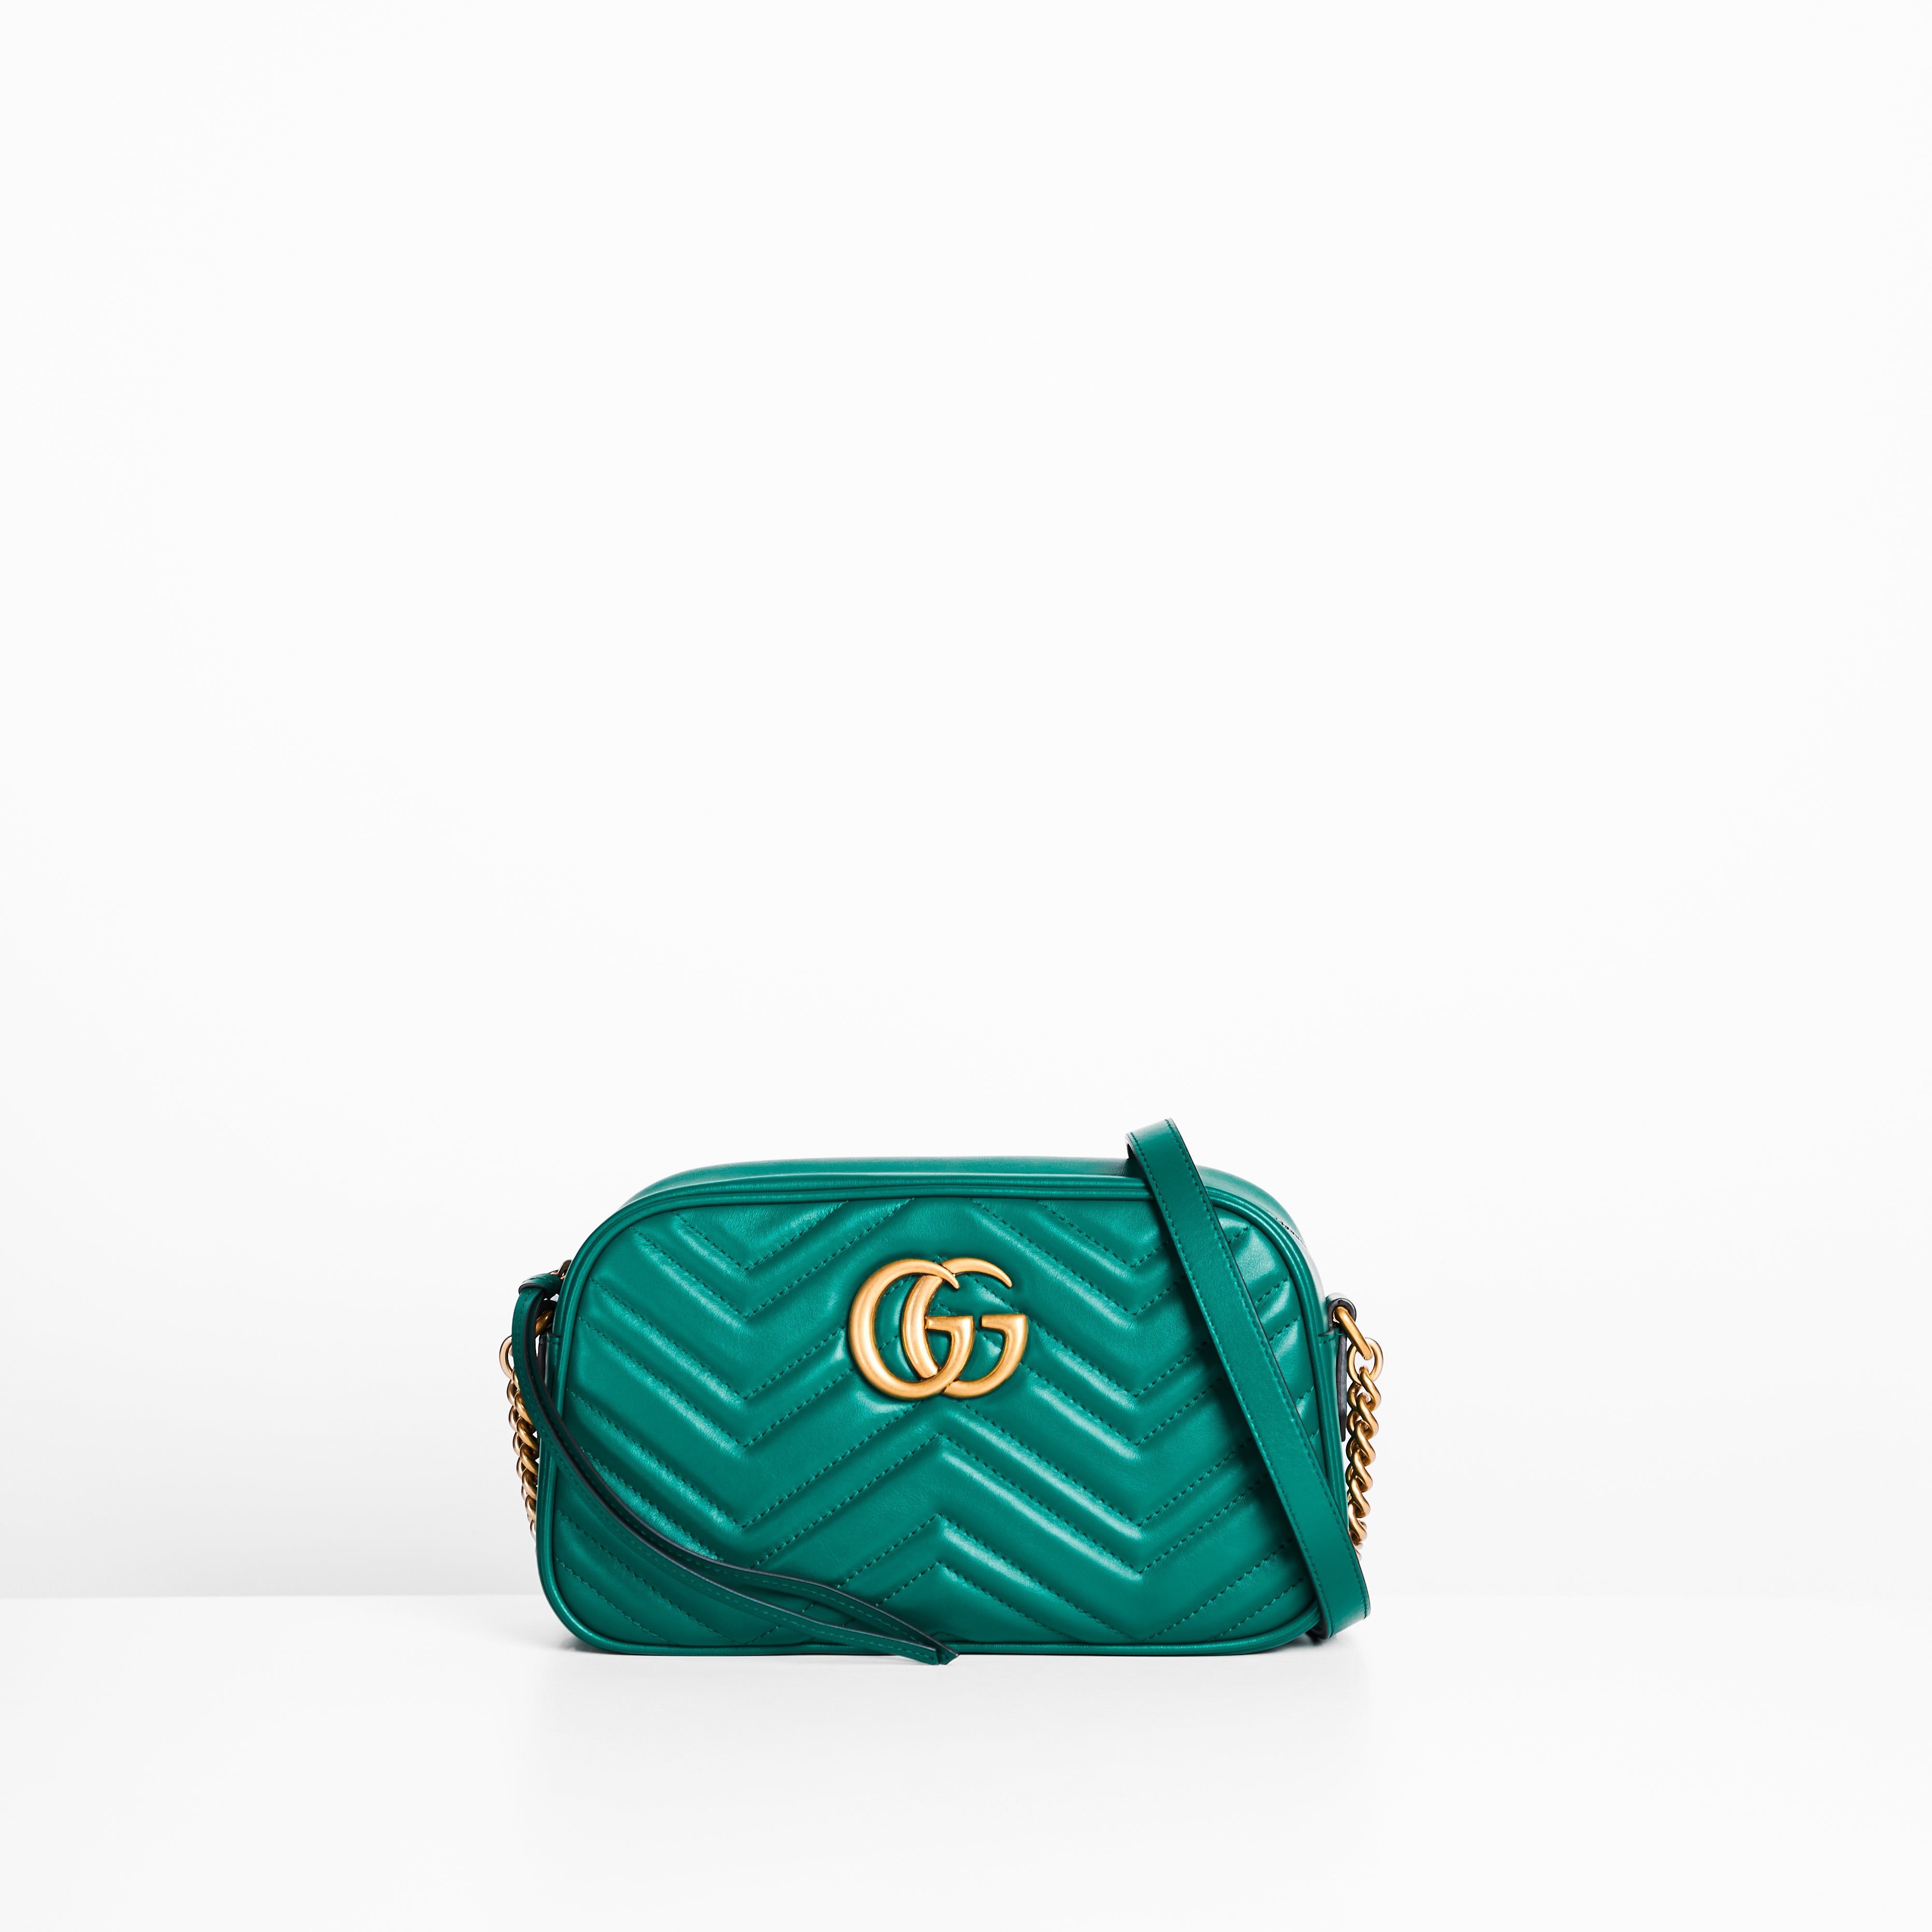 GUCCI MARMONT SMALL SHOULDER BAG 2 YEAR REVIEW [WEAR & TEAR] [GG] - YouTube